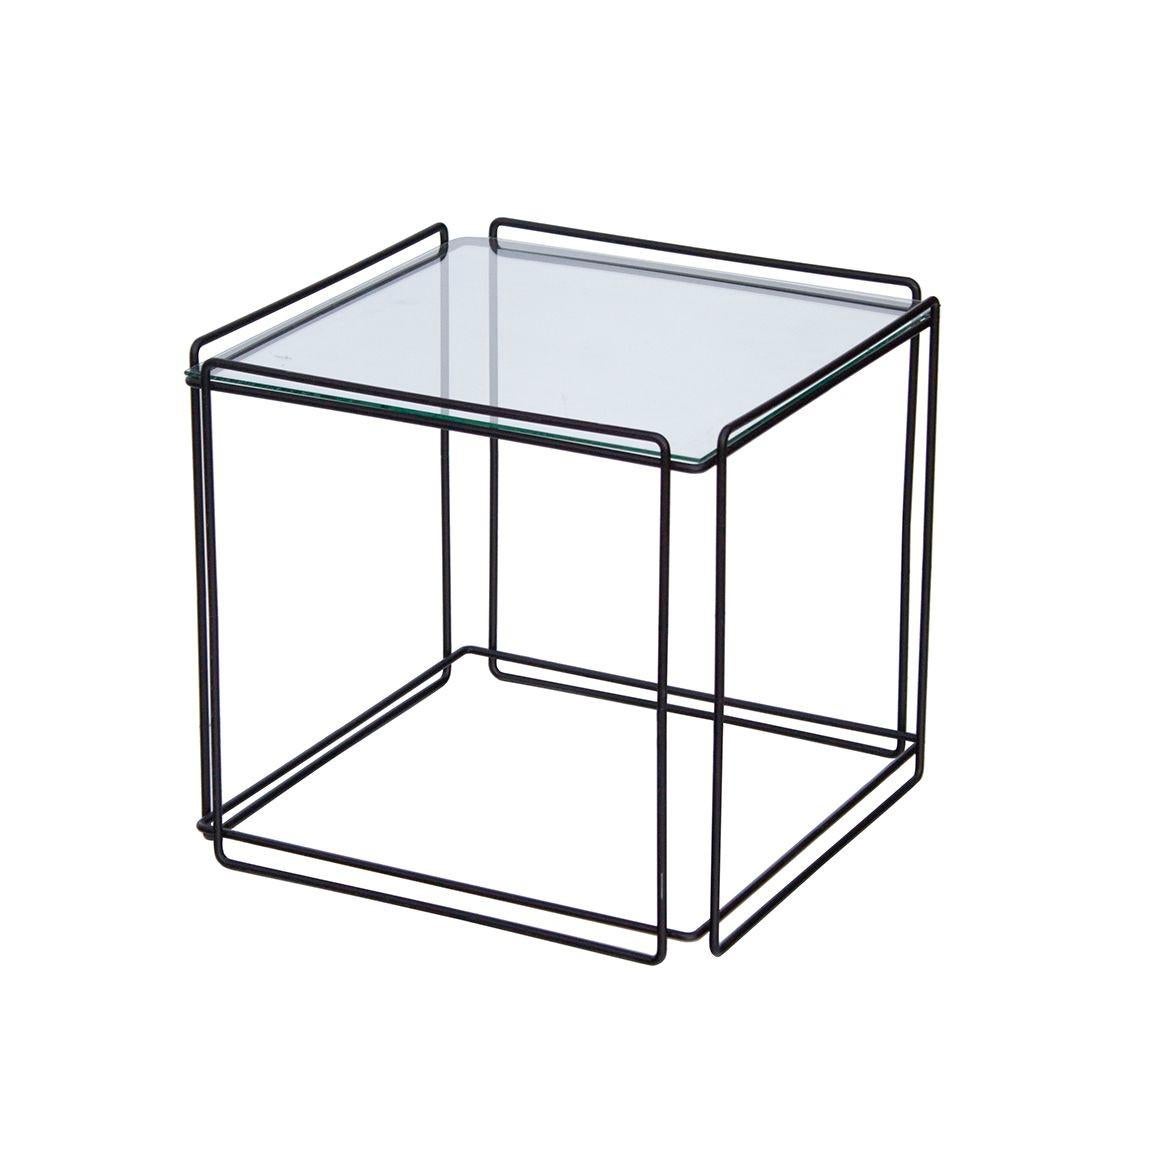 Max Sauze Isosceles End Table with Glass Top by Atrow In Good Condition For Sale In Grand Rapids, MI